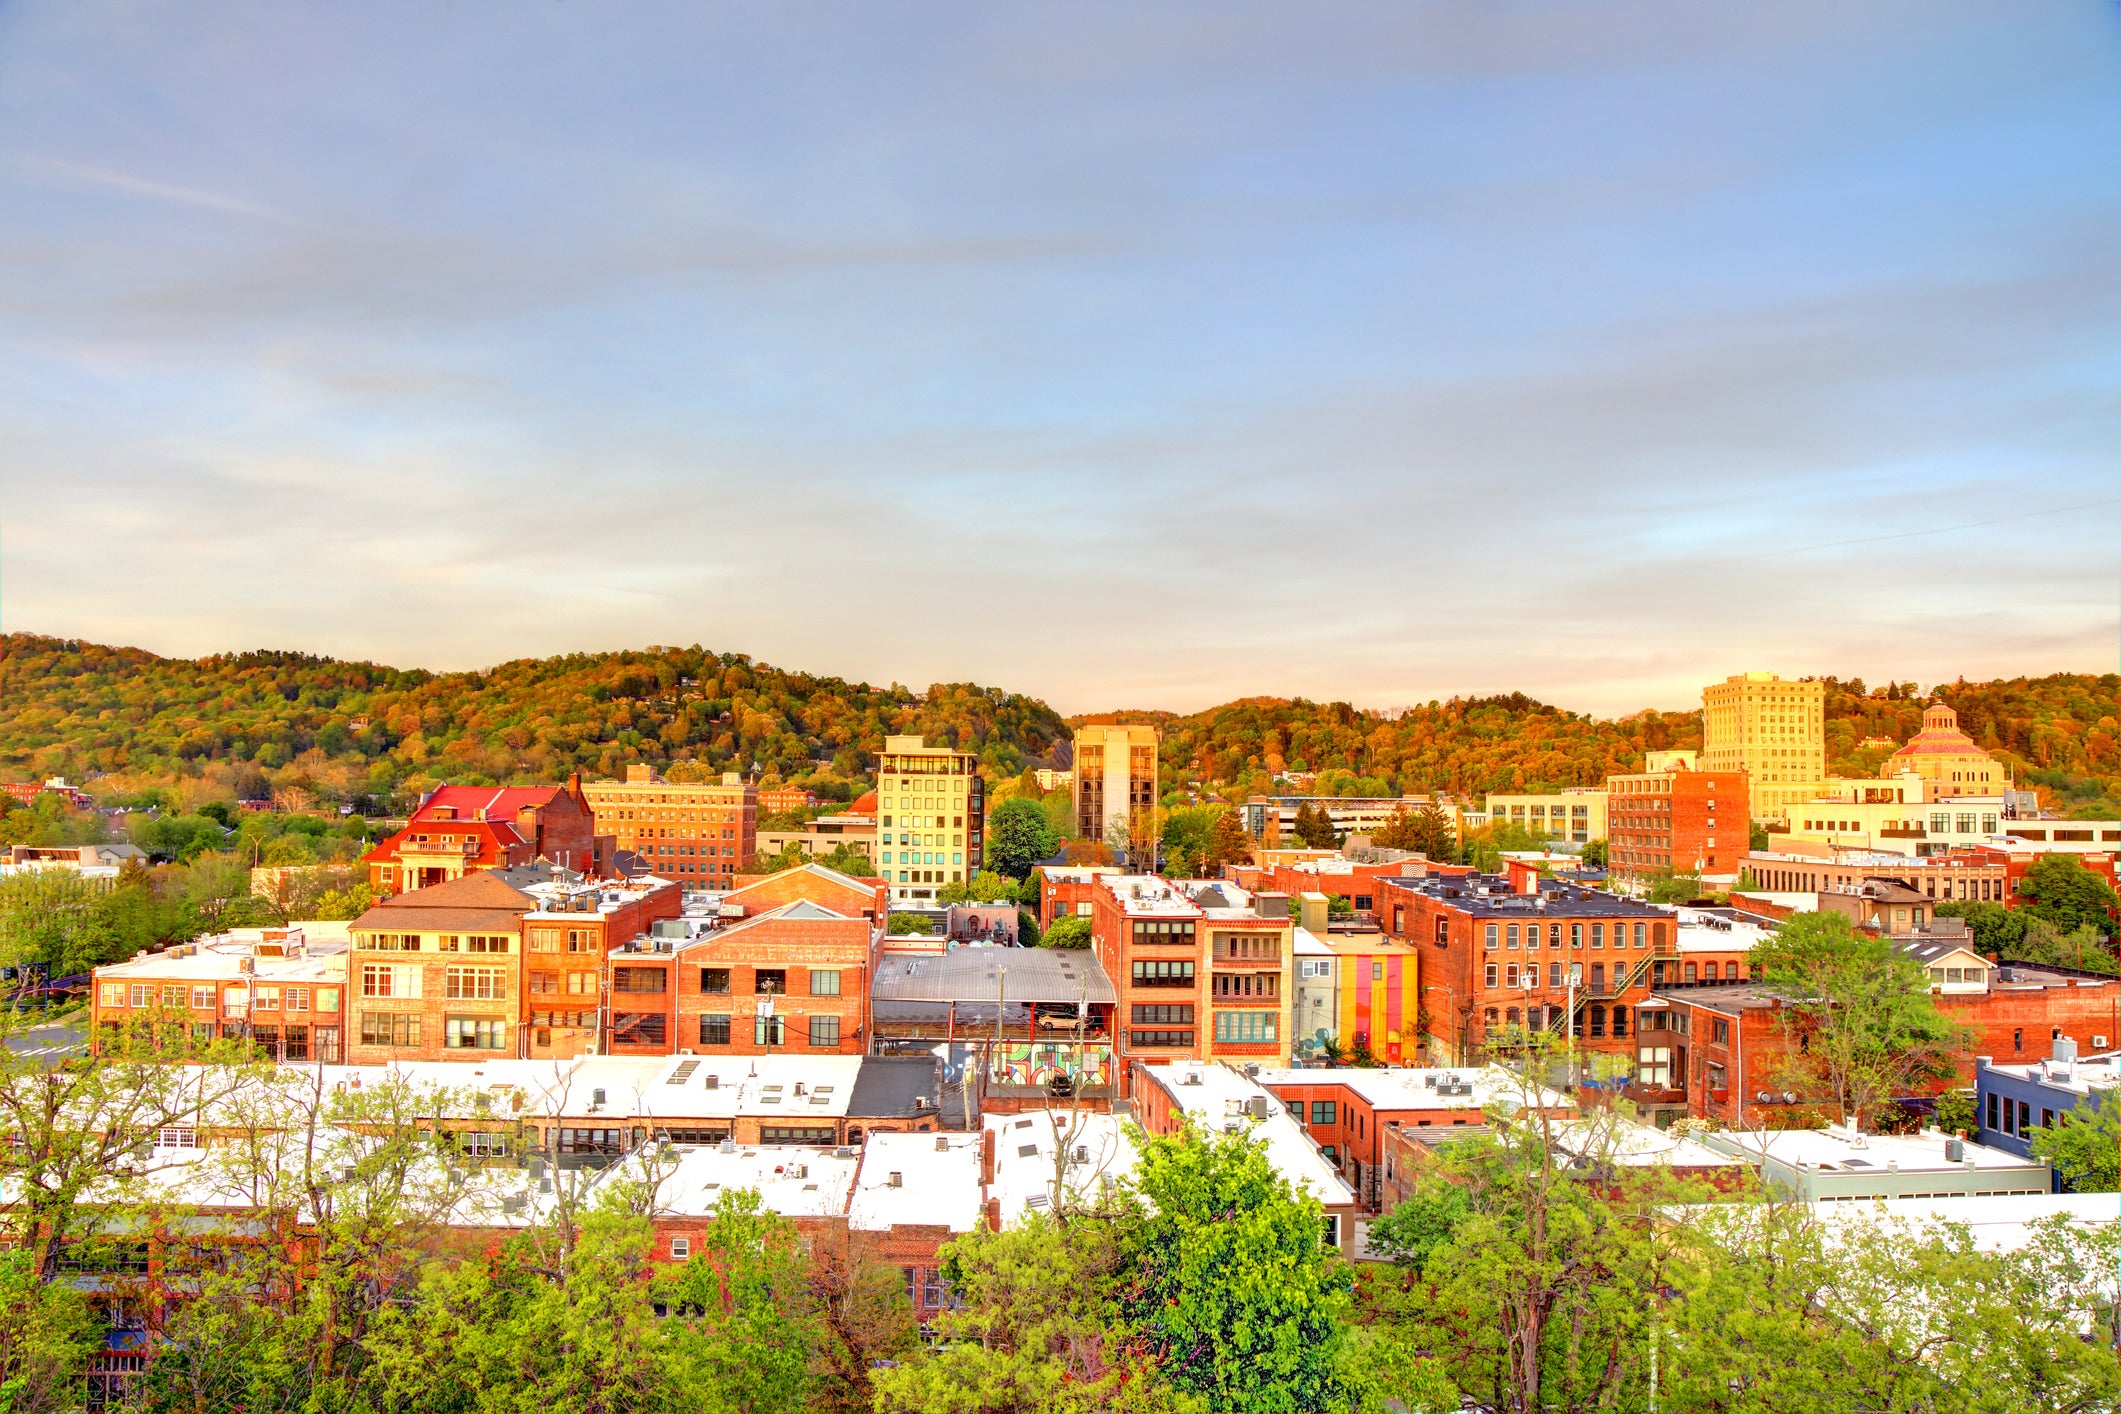 Visitors to Asheville are often drawn to the colourful River Arts District